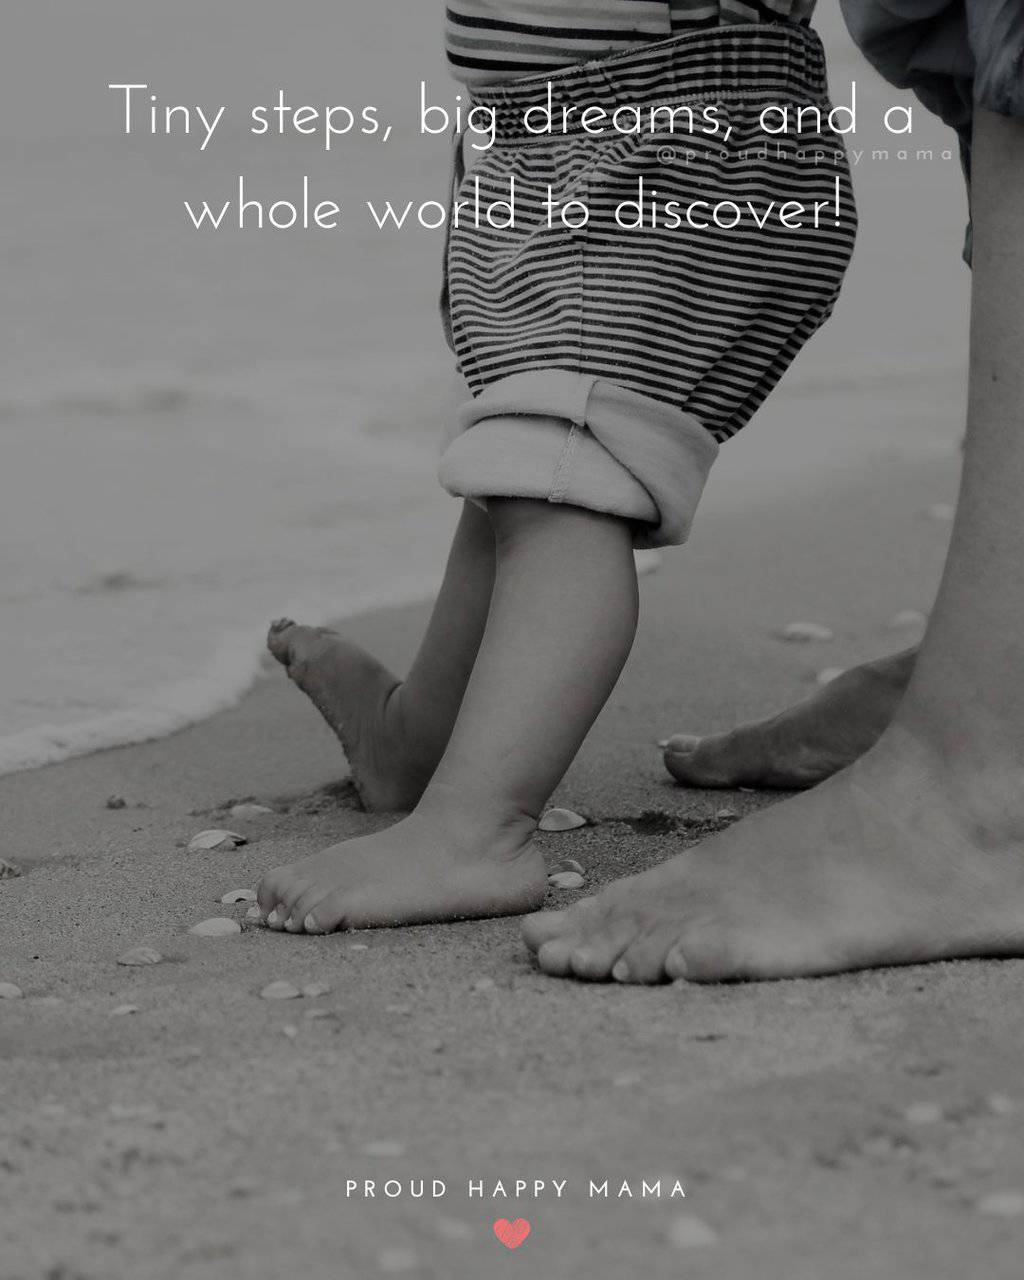 baby first steps quote - Tiny steps, big dreams, and a whole world to discover